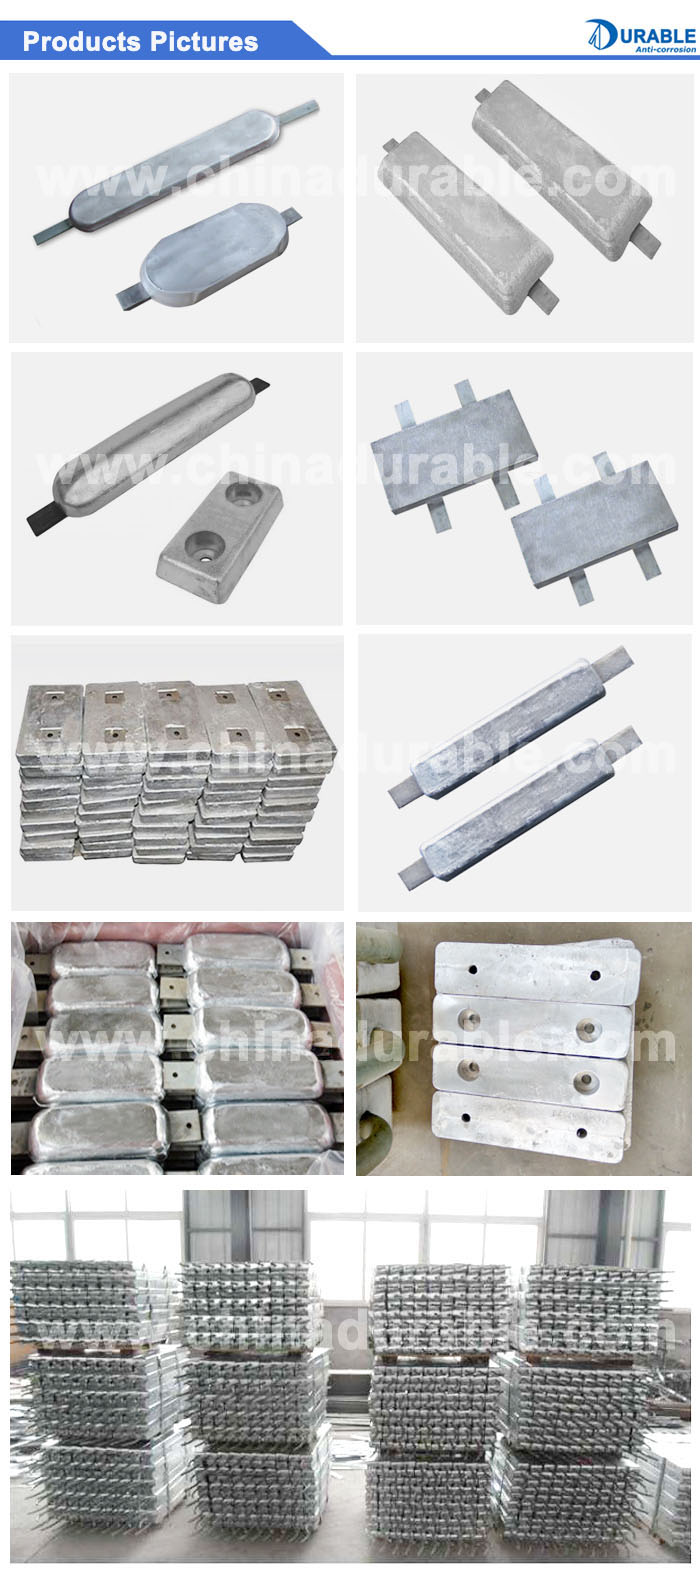 China zinc anodes ship suppliers and manufacturers Zinc alloy zinc ship anodes for sale